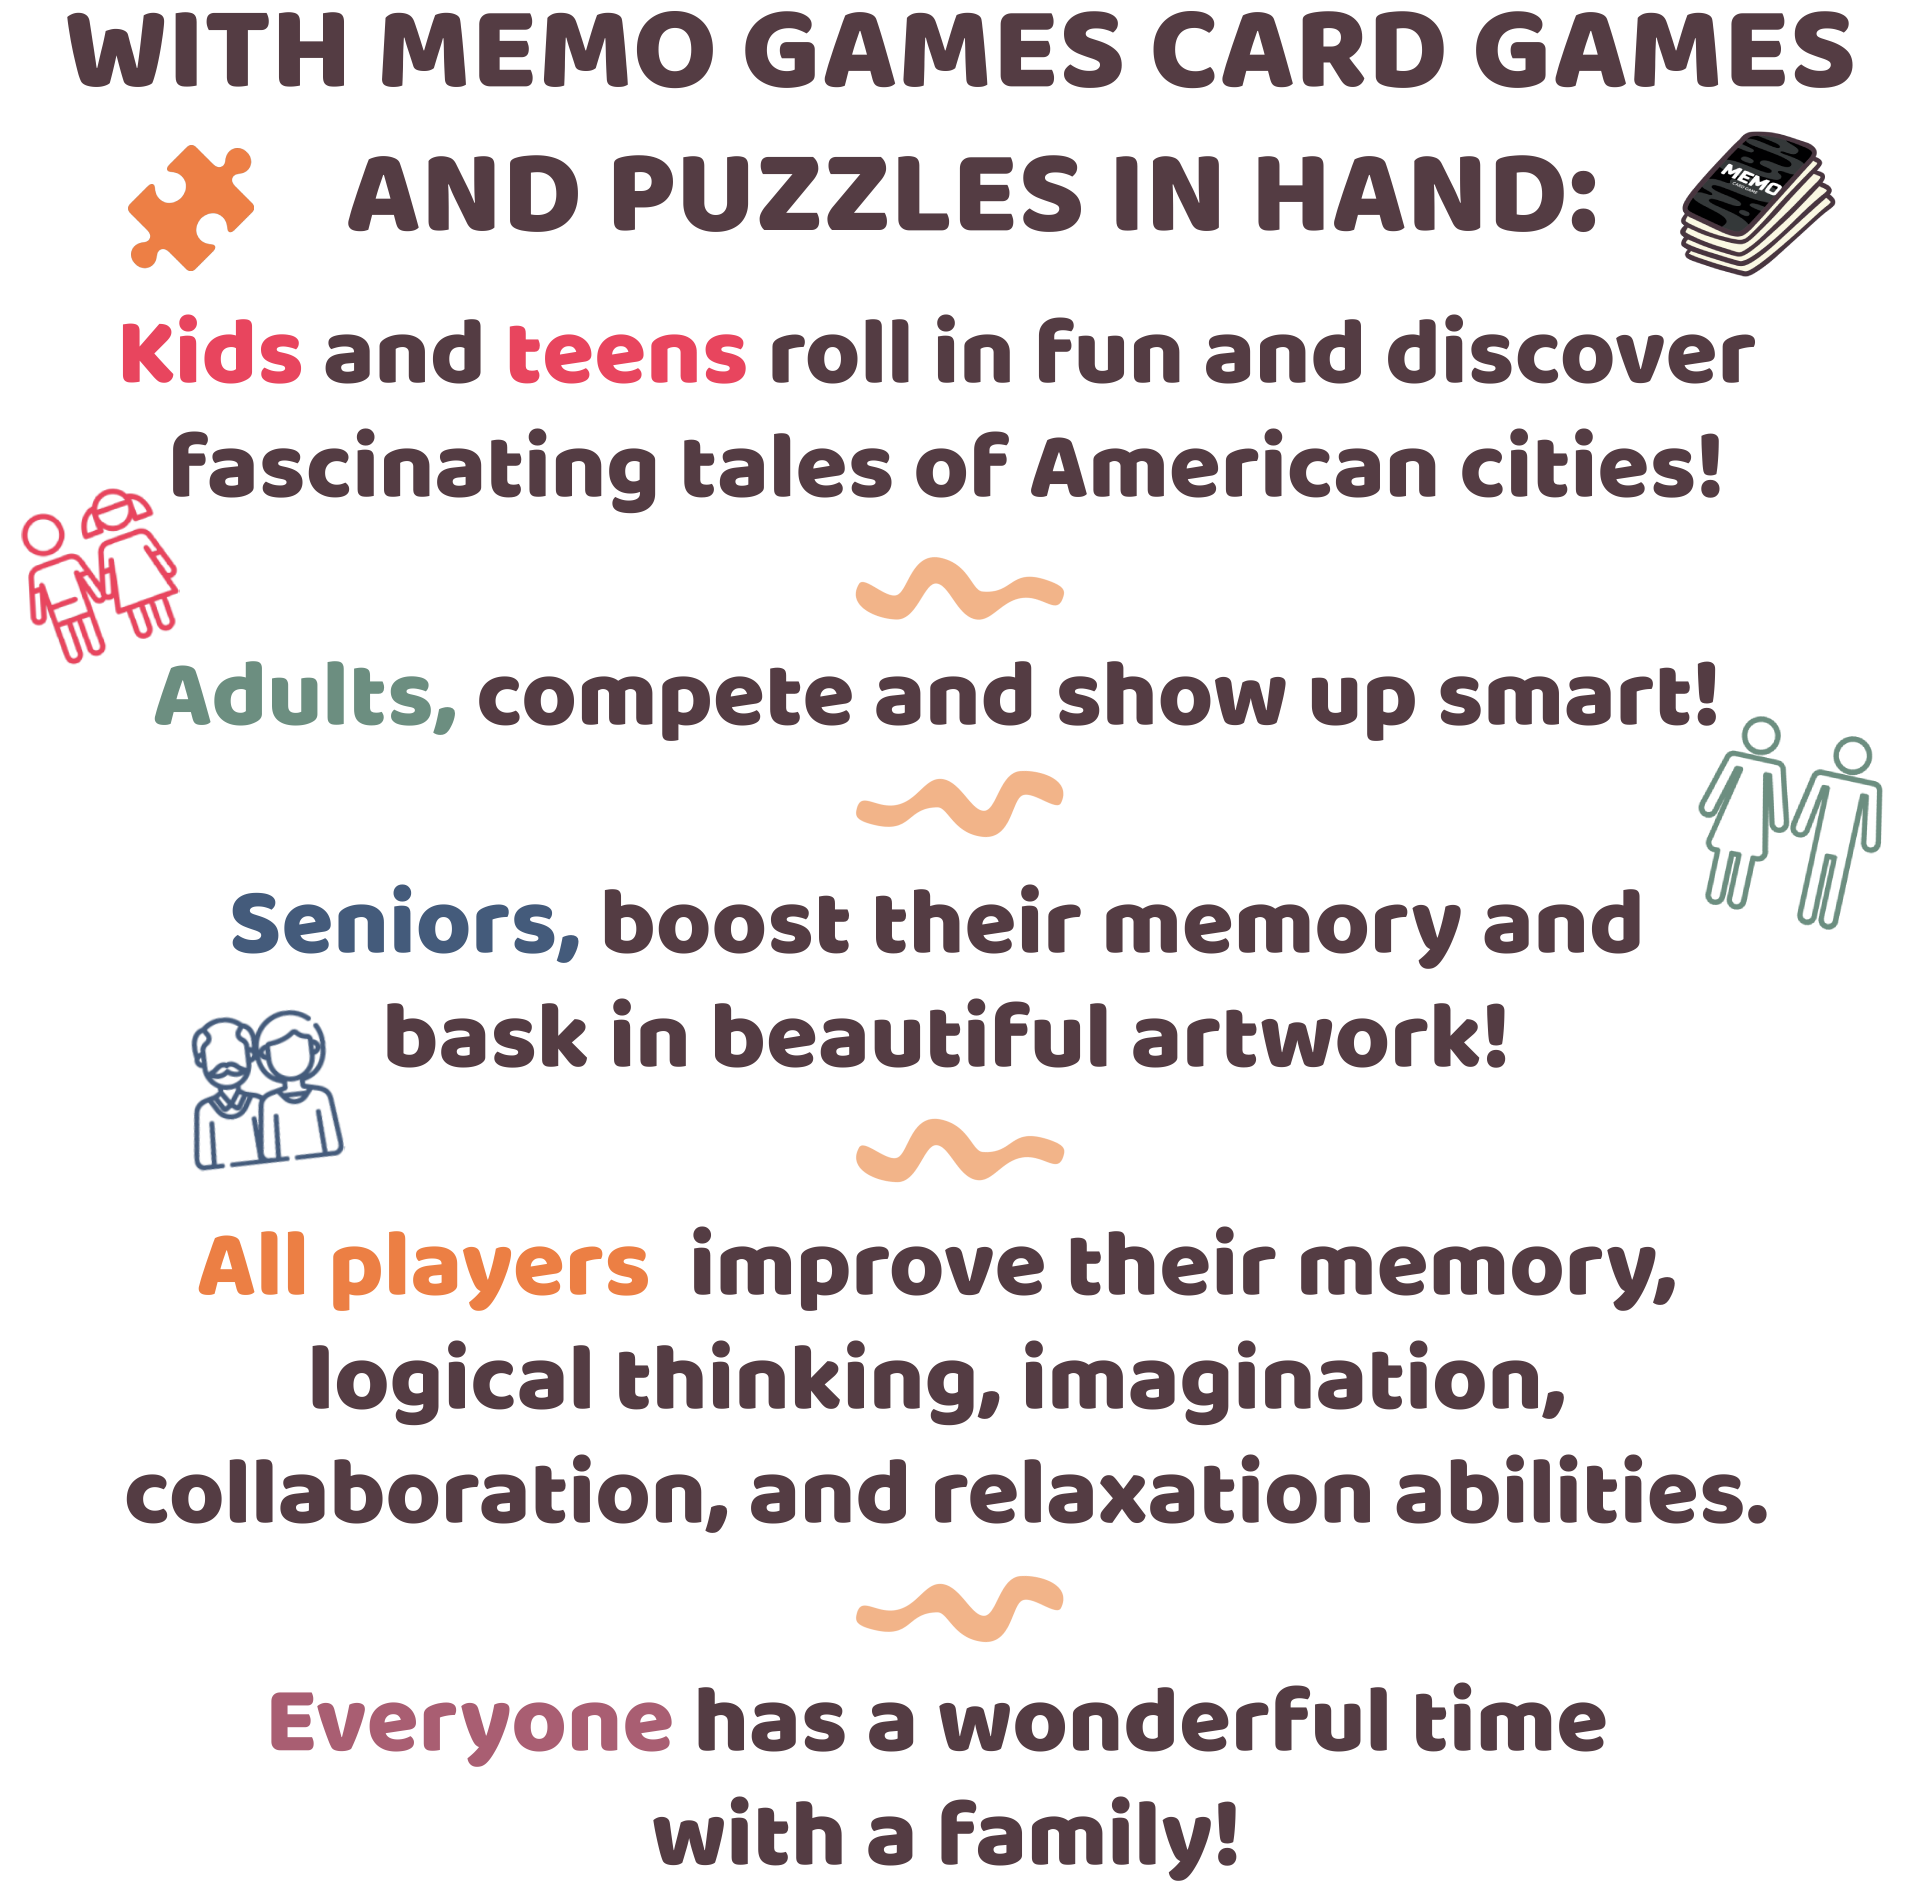 With MEMO GAMES CARD GAMES AND PUZZLES IN HAND: Kids and teens roll in fun and discover fascinating tales of American cities! Adults compete and show up smart! Seniors boost their memory and bask in beautiful artwork! All players improve their memory, logical thinking, imagination, collaboration, and relaxation abilities. Everyone has a wonderful time with a family!